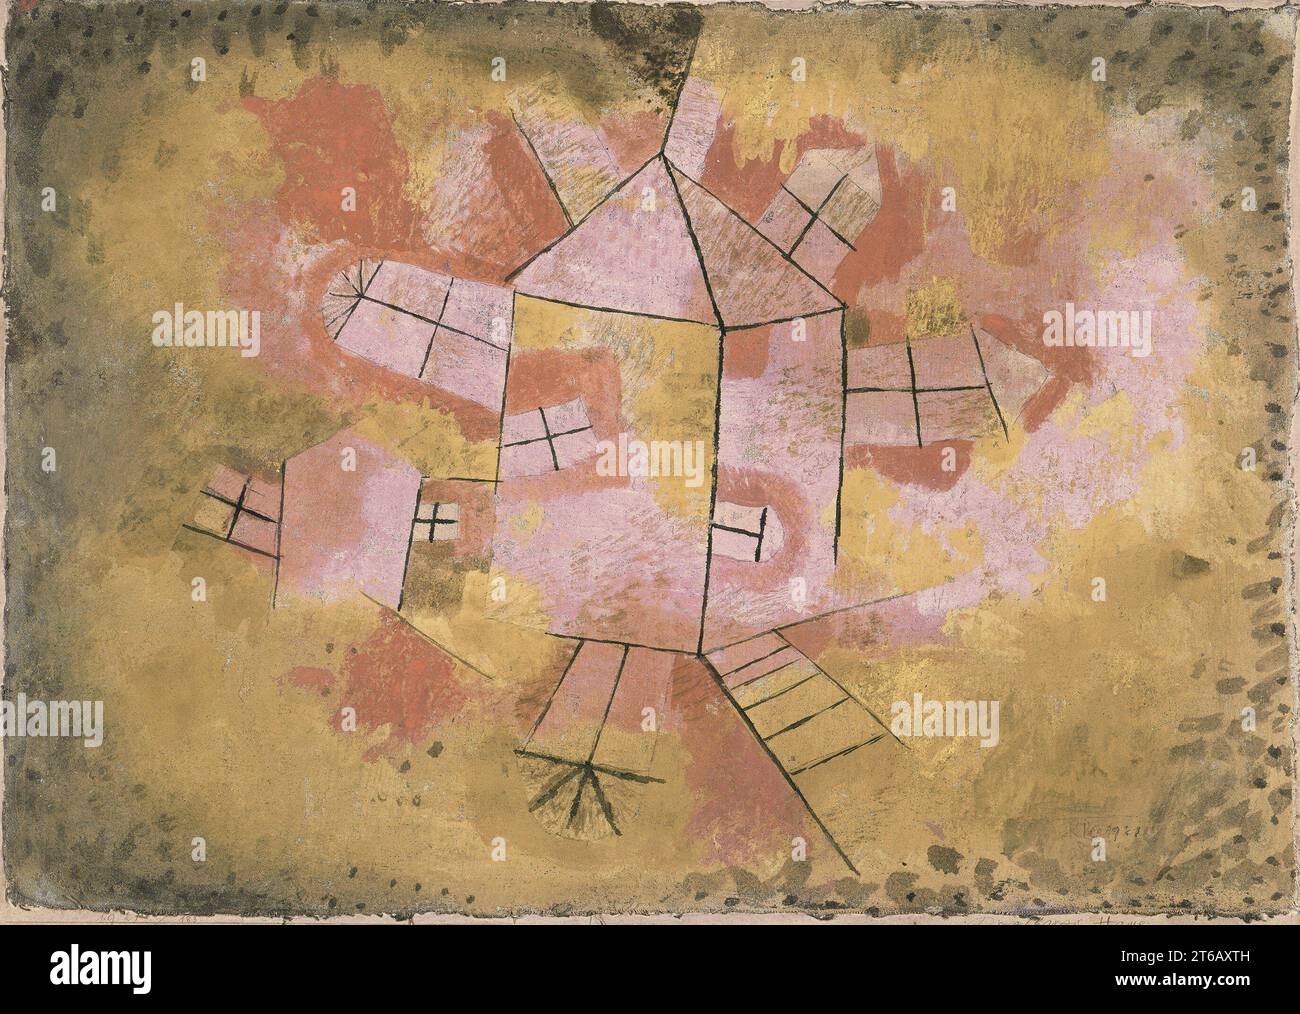 Title: Revolving House, 1921, 183 Artist: Paul Klee Year: 1921 Medium: Oil and pencil on cotton cheesecloth mounted on paper Dimensions: 37.7 x 52.2 cm Location: Museo Nacional Thyssen-Bornemisza, Madrid Stock Photo